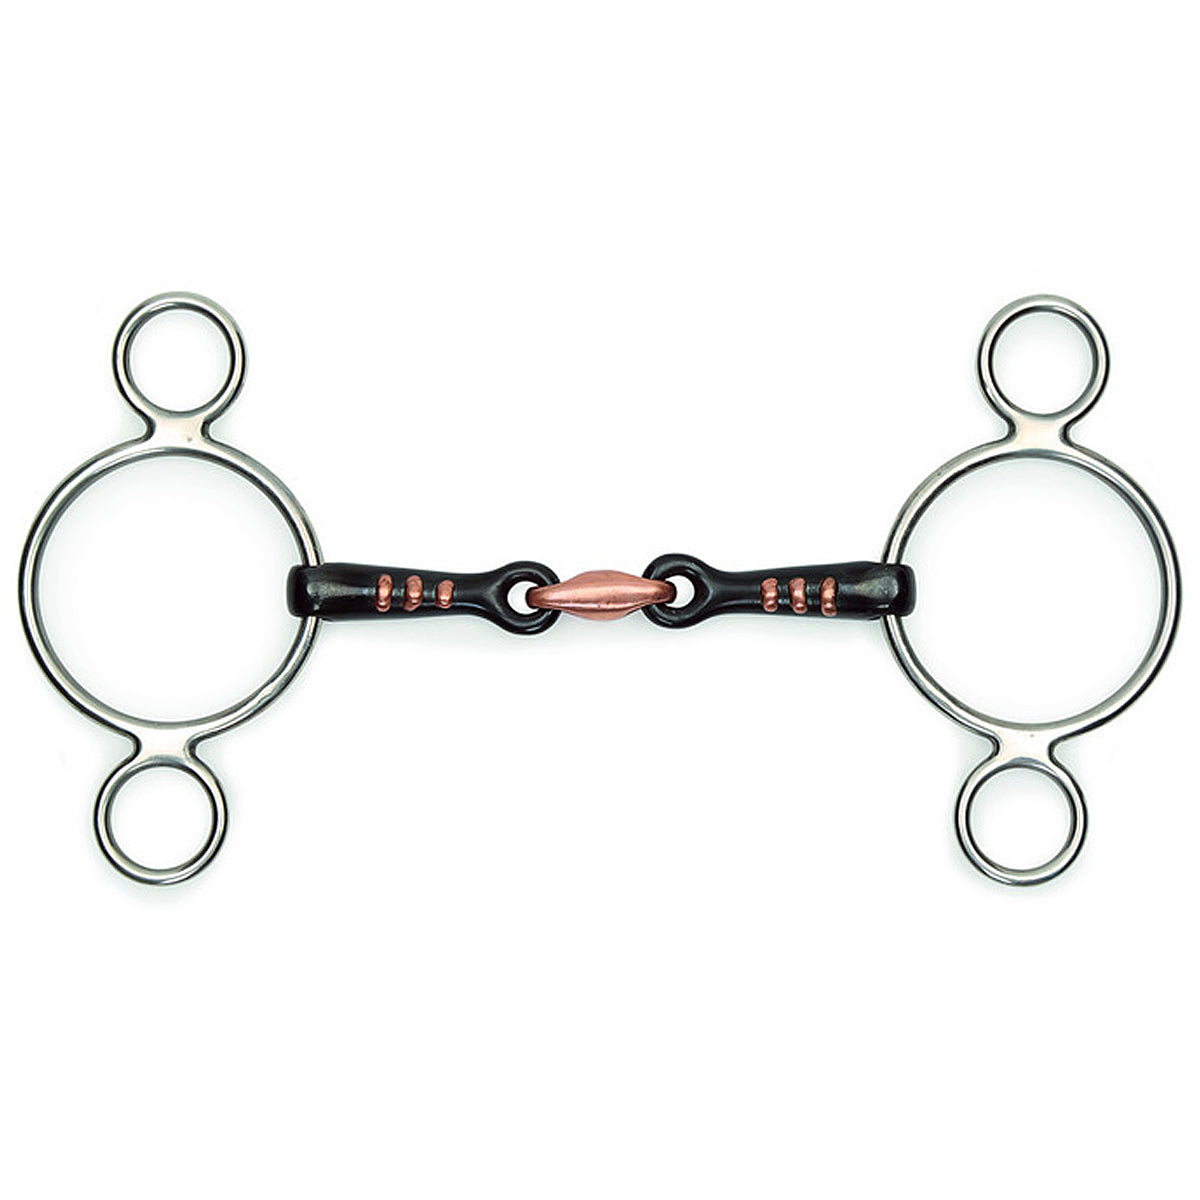 Shires Two Ring Sweet Iron Gag with Raised Ribs Bit